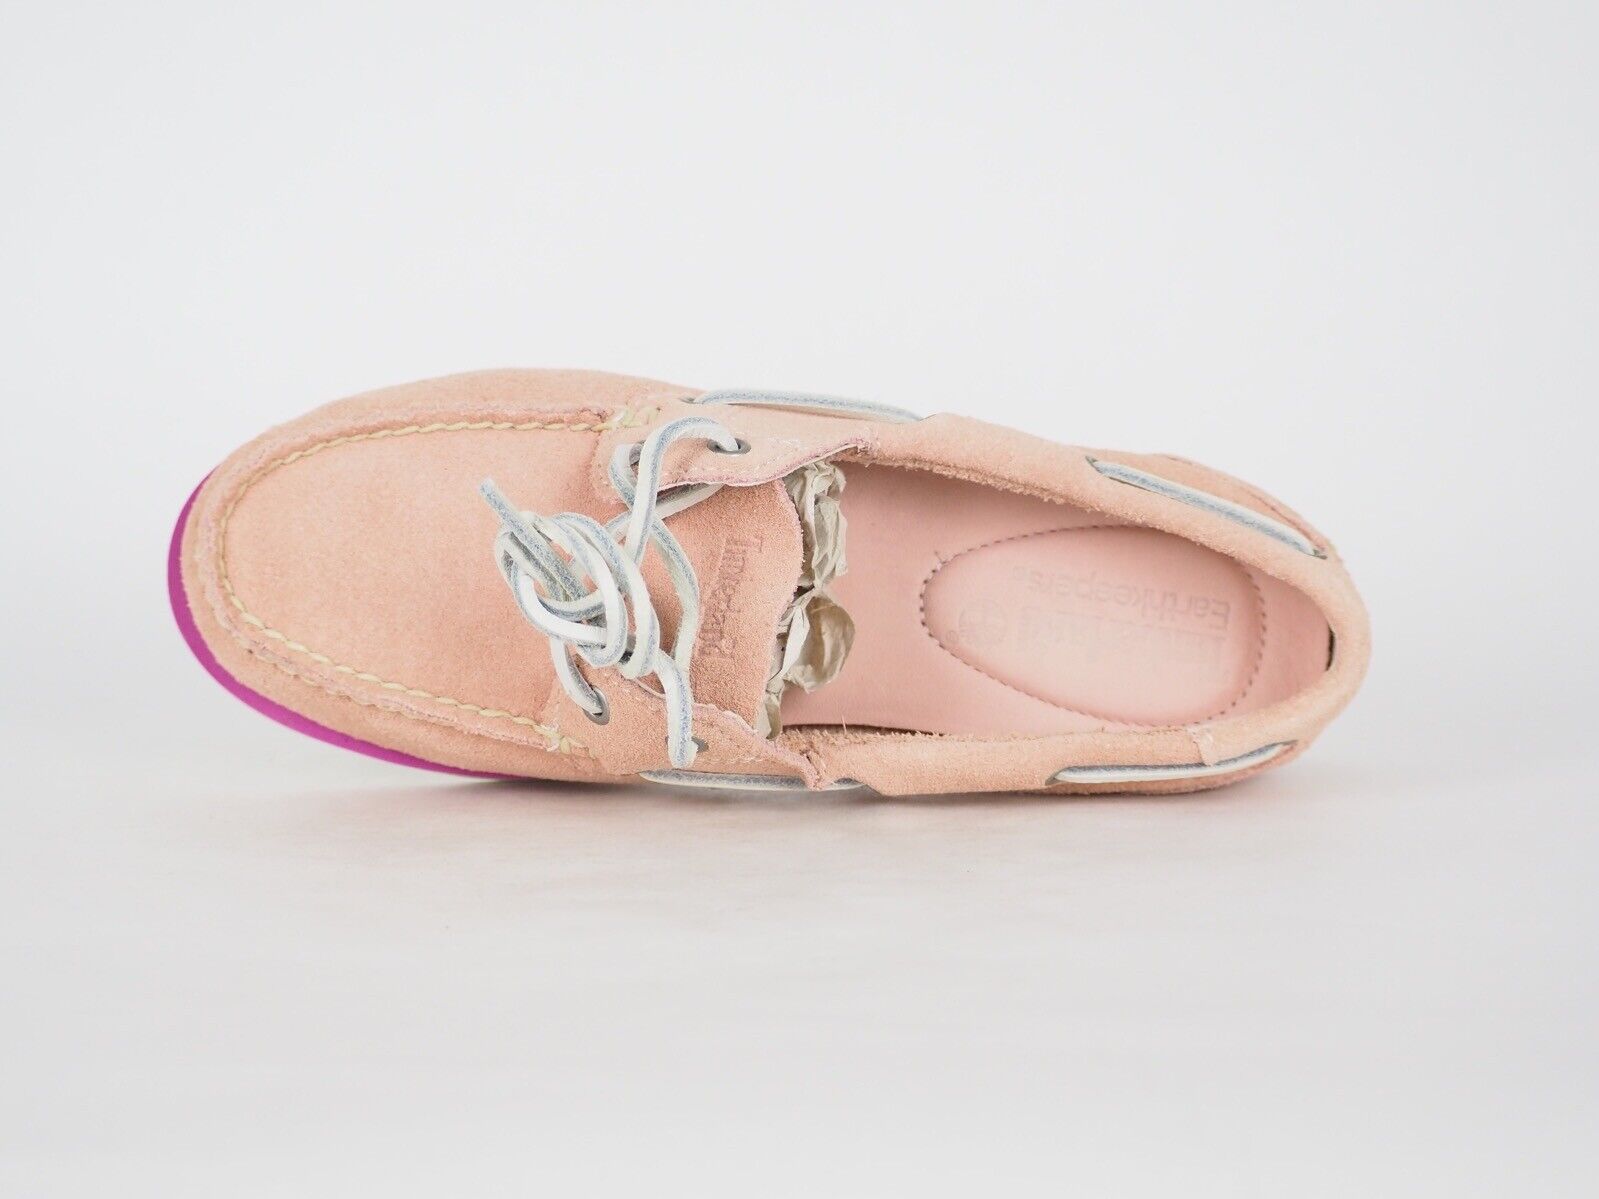 Womens Timberland Marin 8345B Light Pink Leather Flats Casual Boat Shoes UK 5